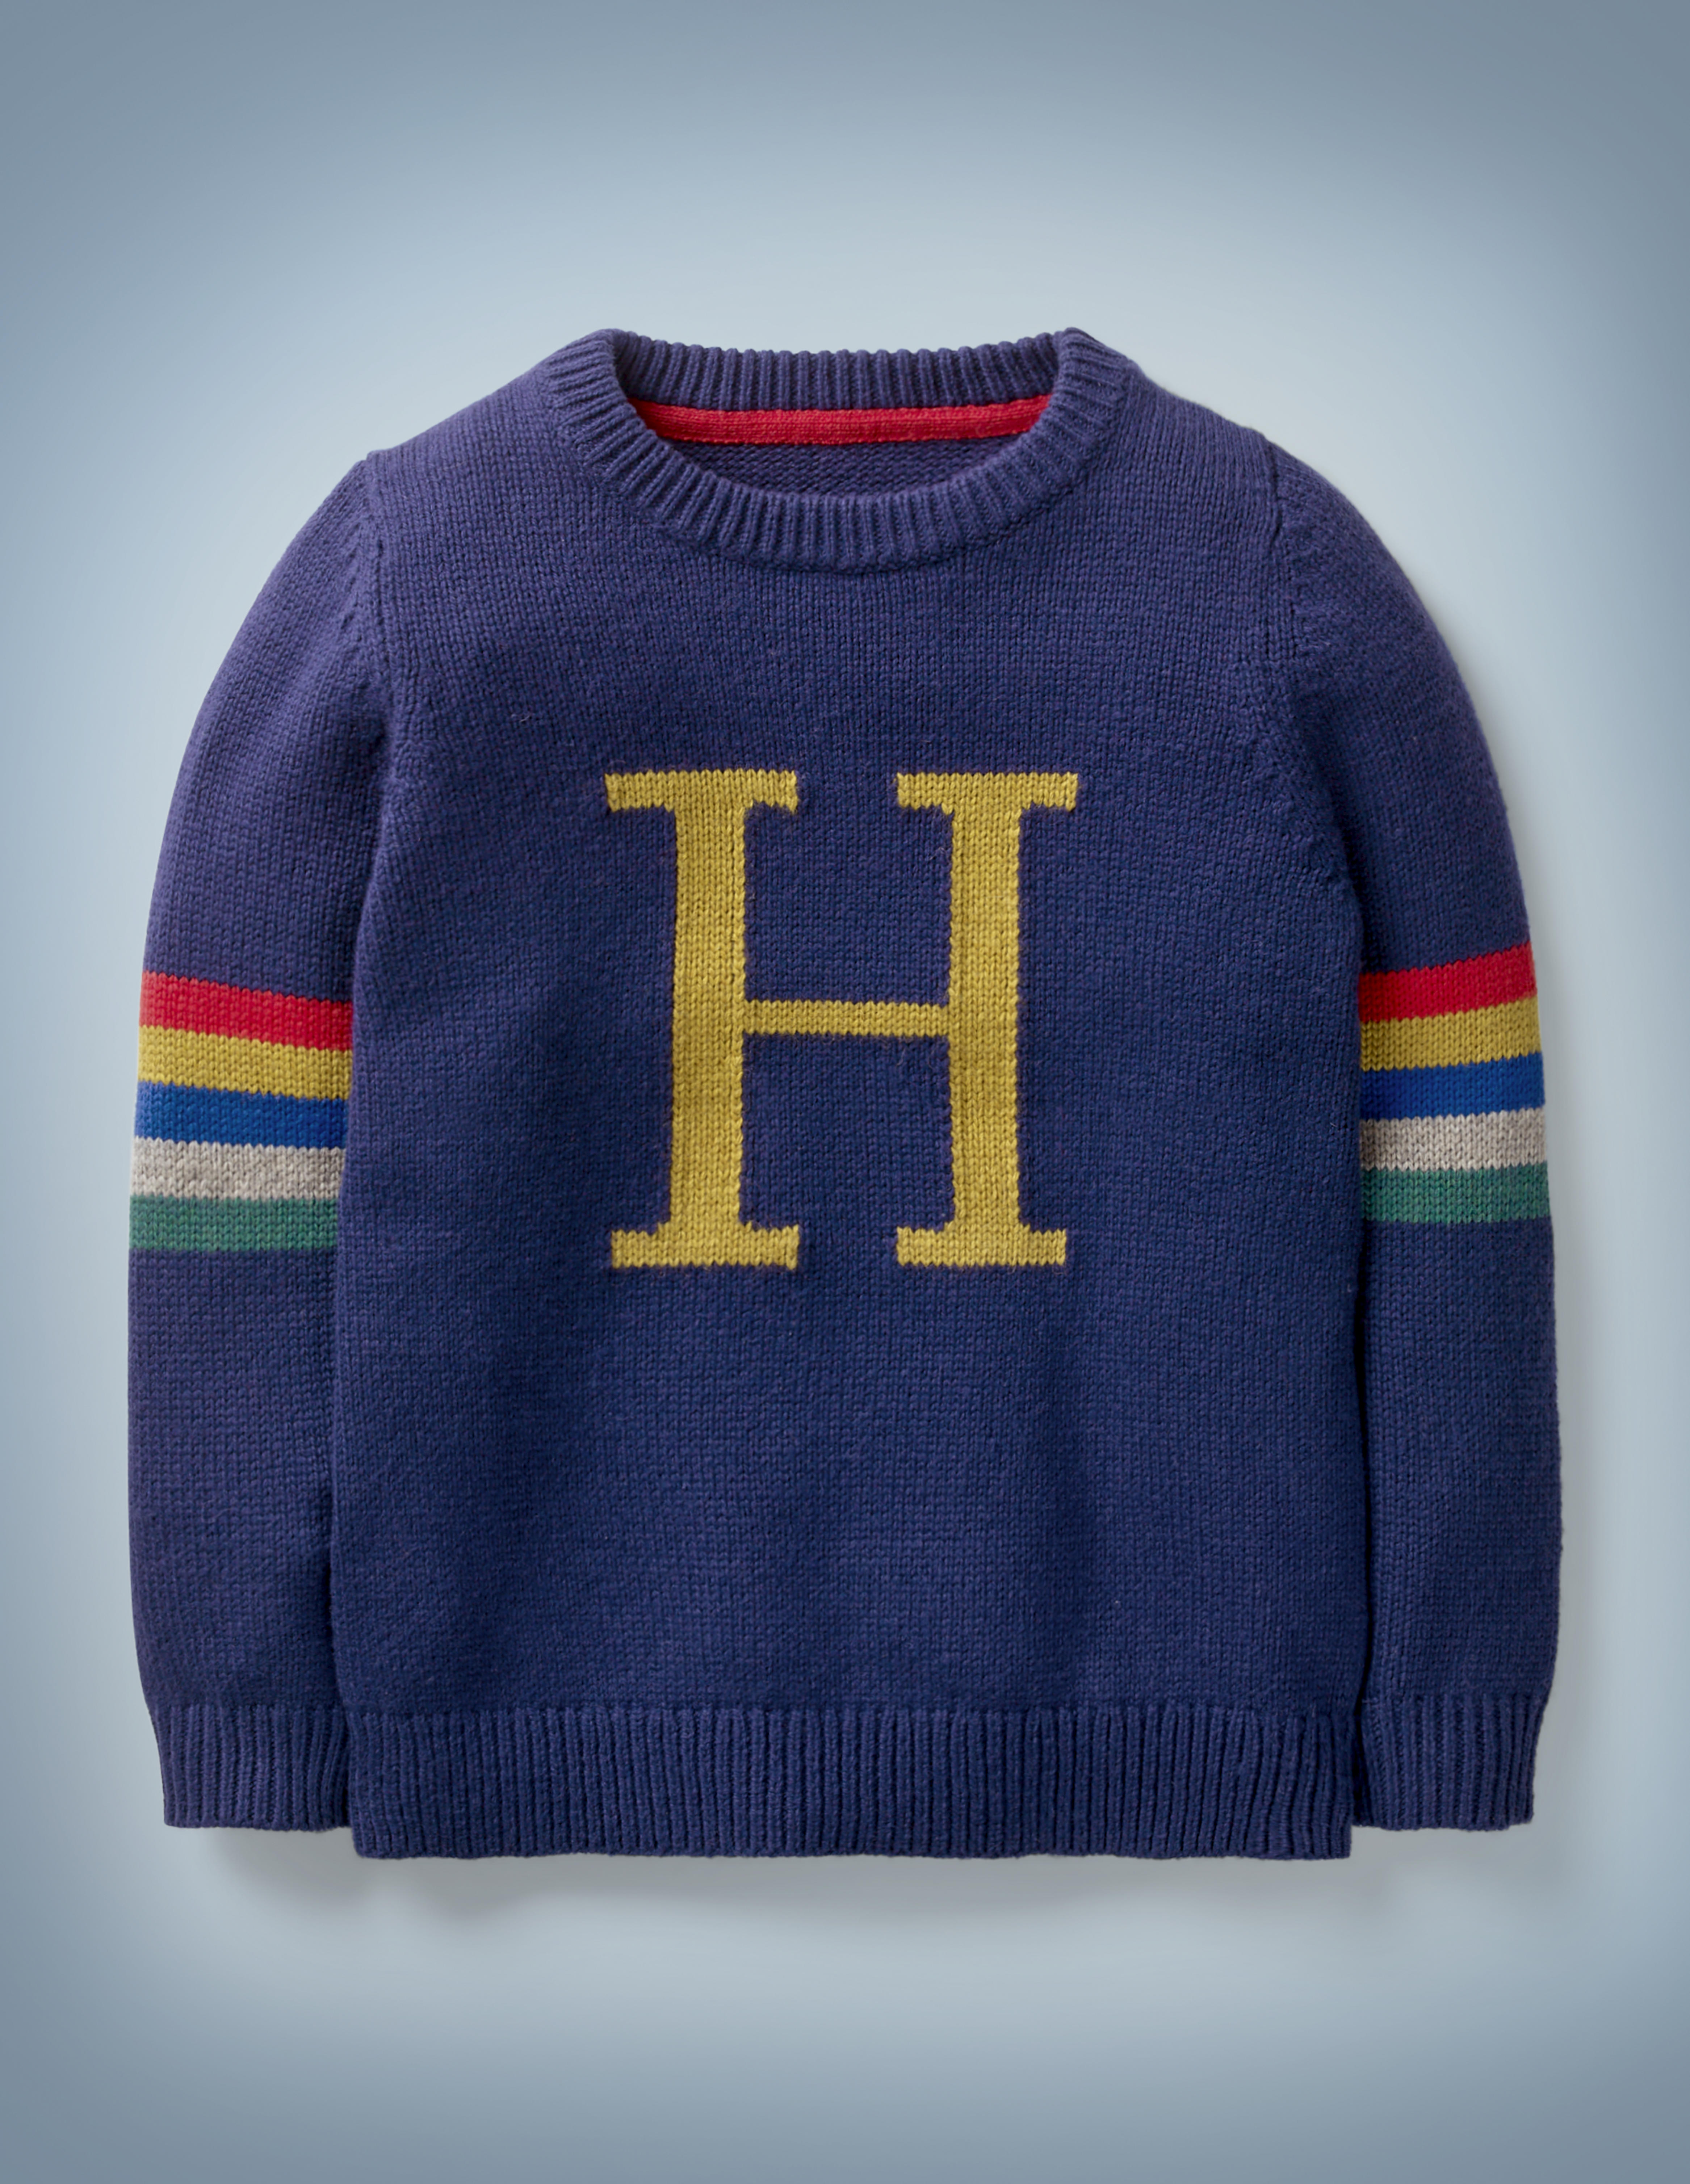 The Mini Boden Harry Potter Knitted Jumper in blue is reminiscent of the Christmas sweater lovingly knitted for Harry by Molly Weasley. It features a large gold “H” in the center with stripes in Hogwarts House colors on both sleeves. It retails between £32 and £37.